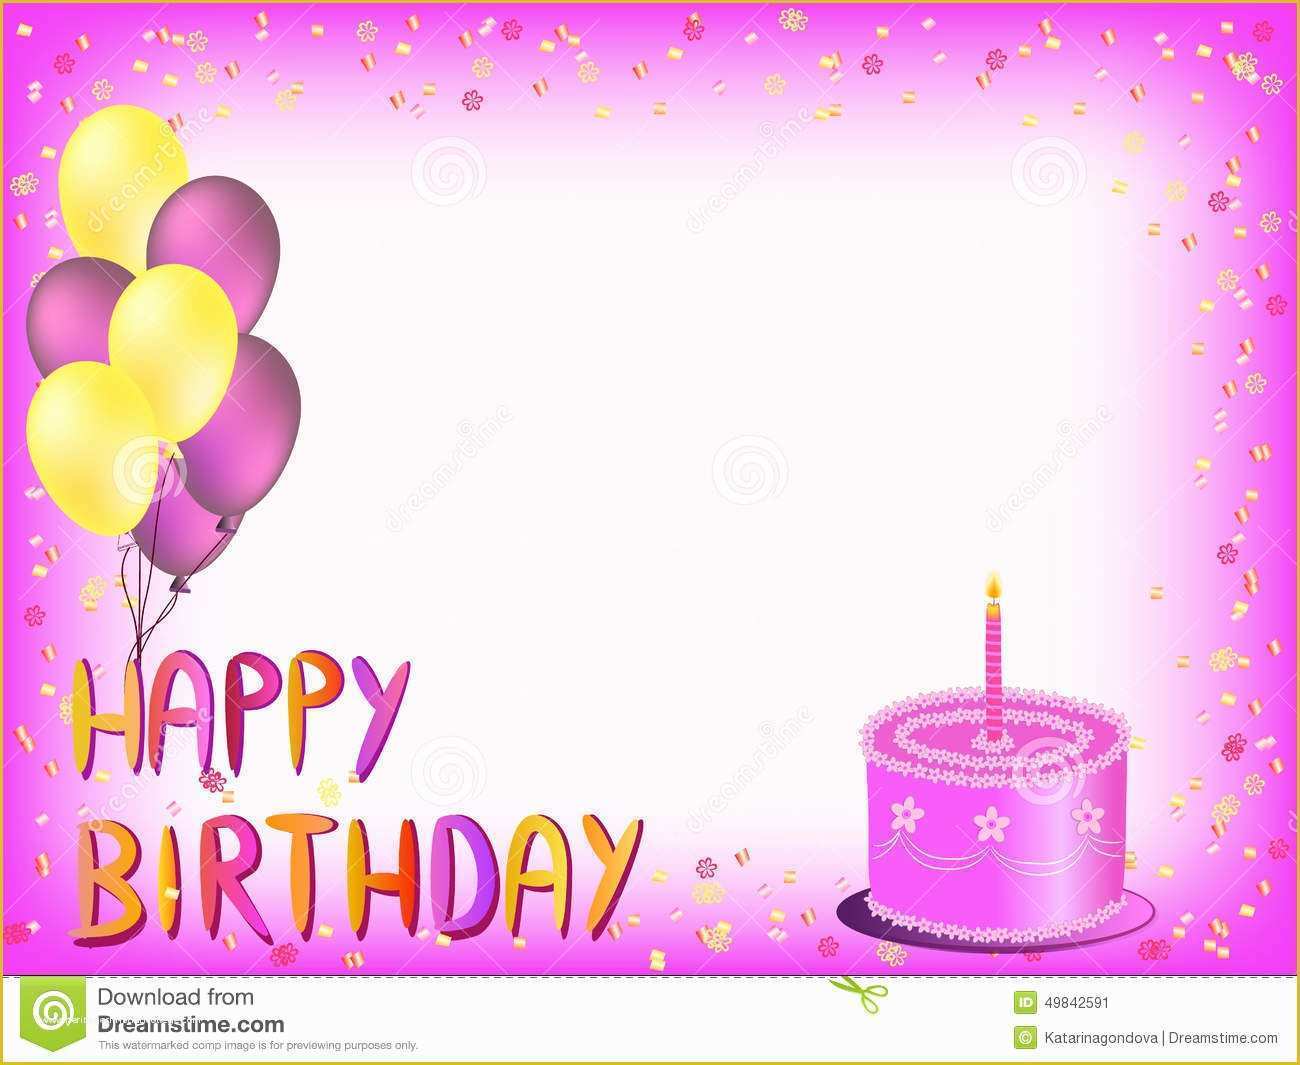 Birthday Wishes Templates Free Download Of Happy Birthday Greeting Cards for [keyword – Card Design Ideas